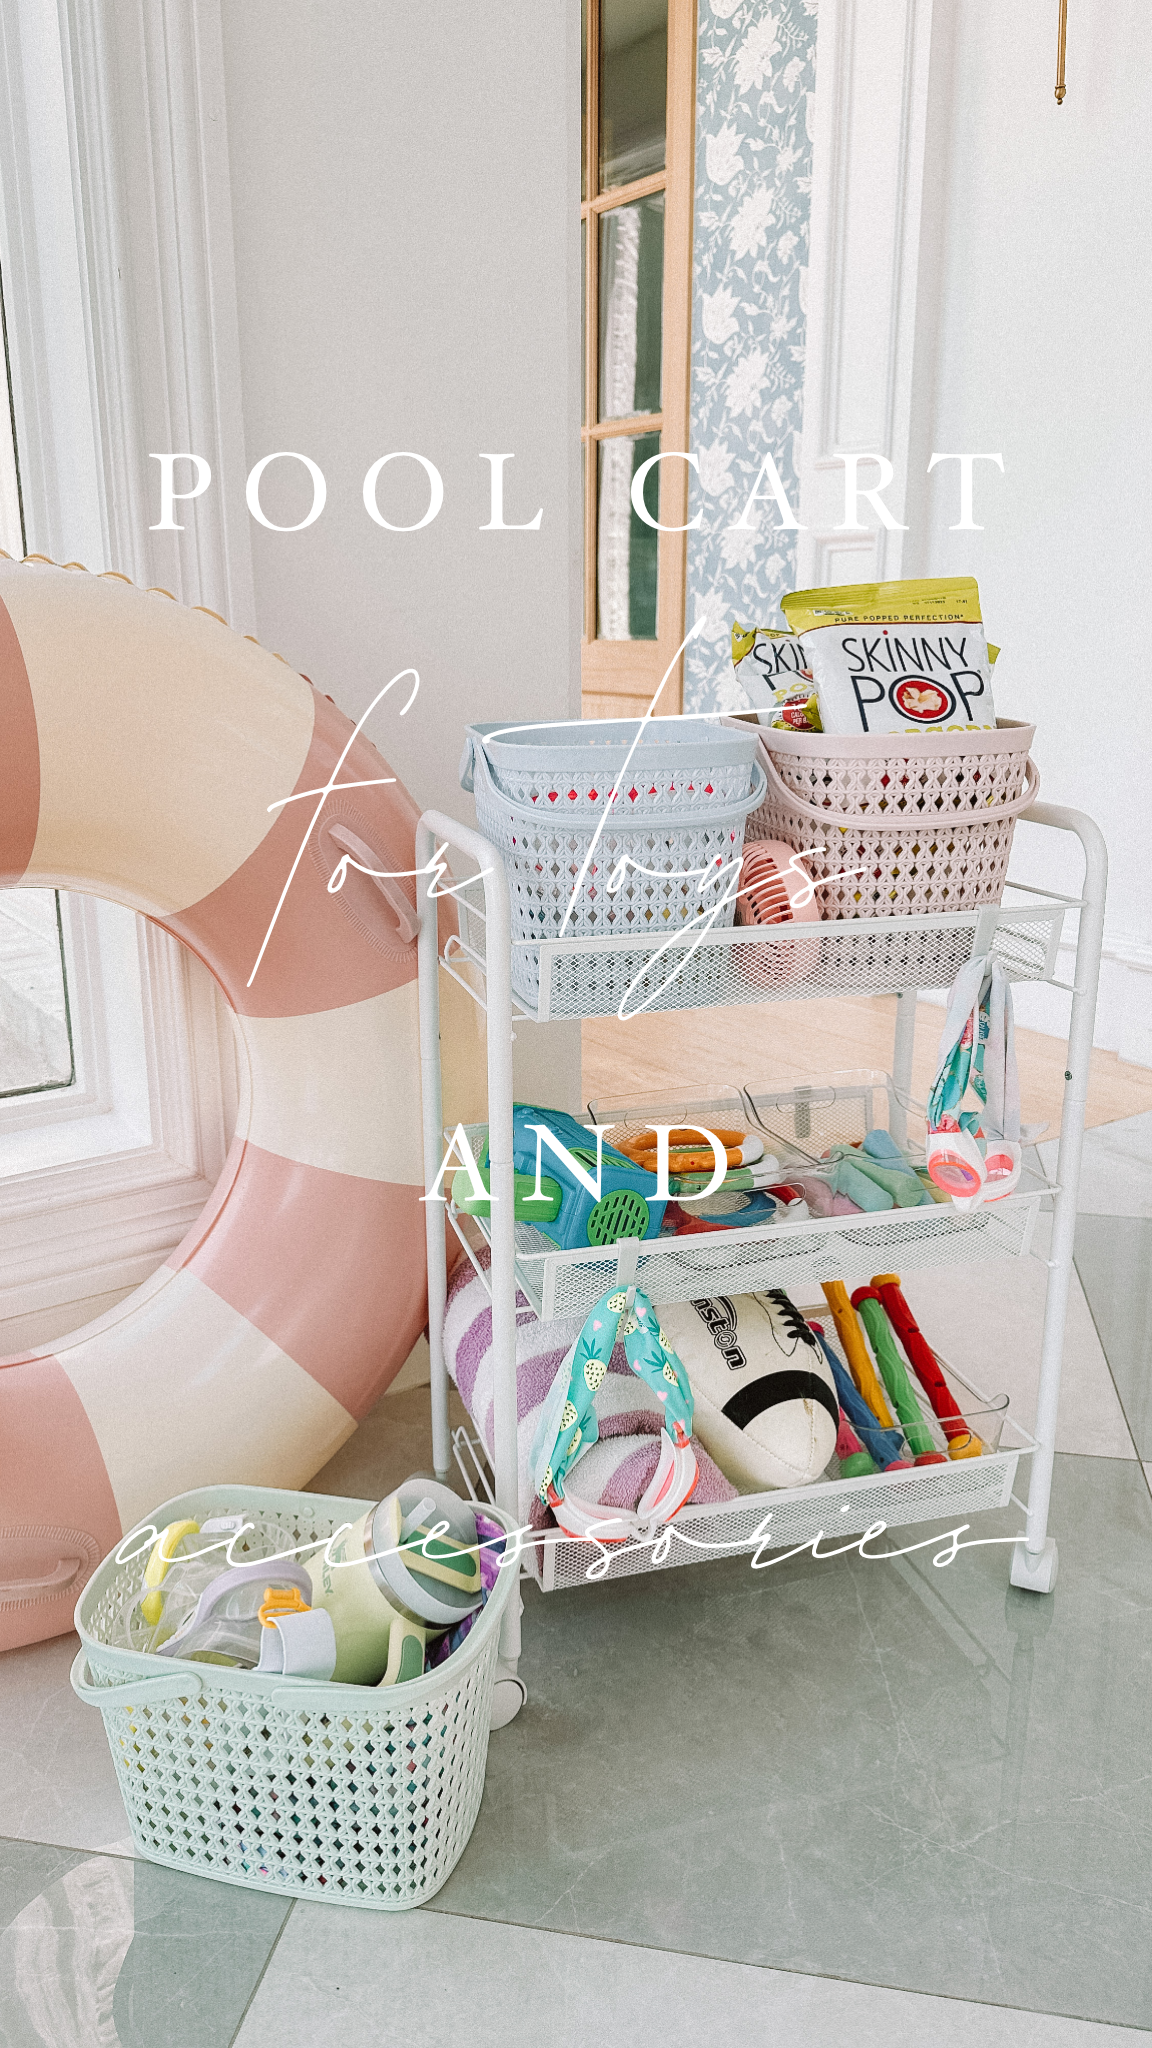 amazon summer finds, casey wiegand amazon, casey wiegand pool cart, pool toys and games, pool accessories, kid activities 